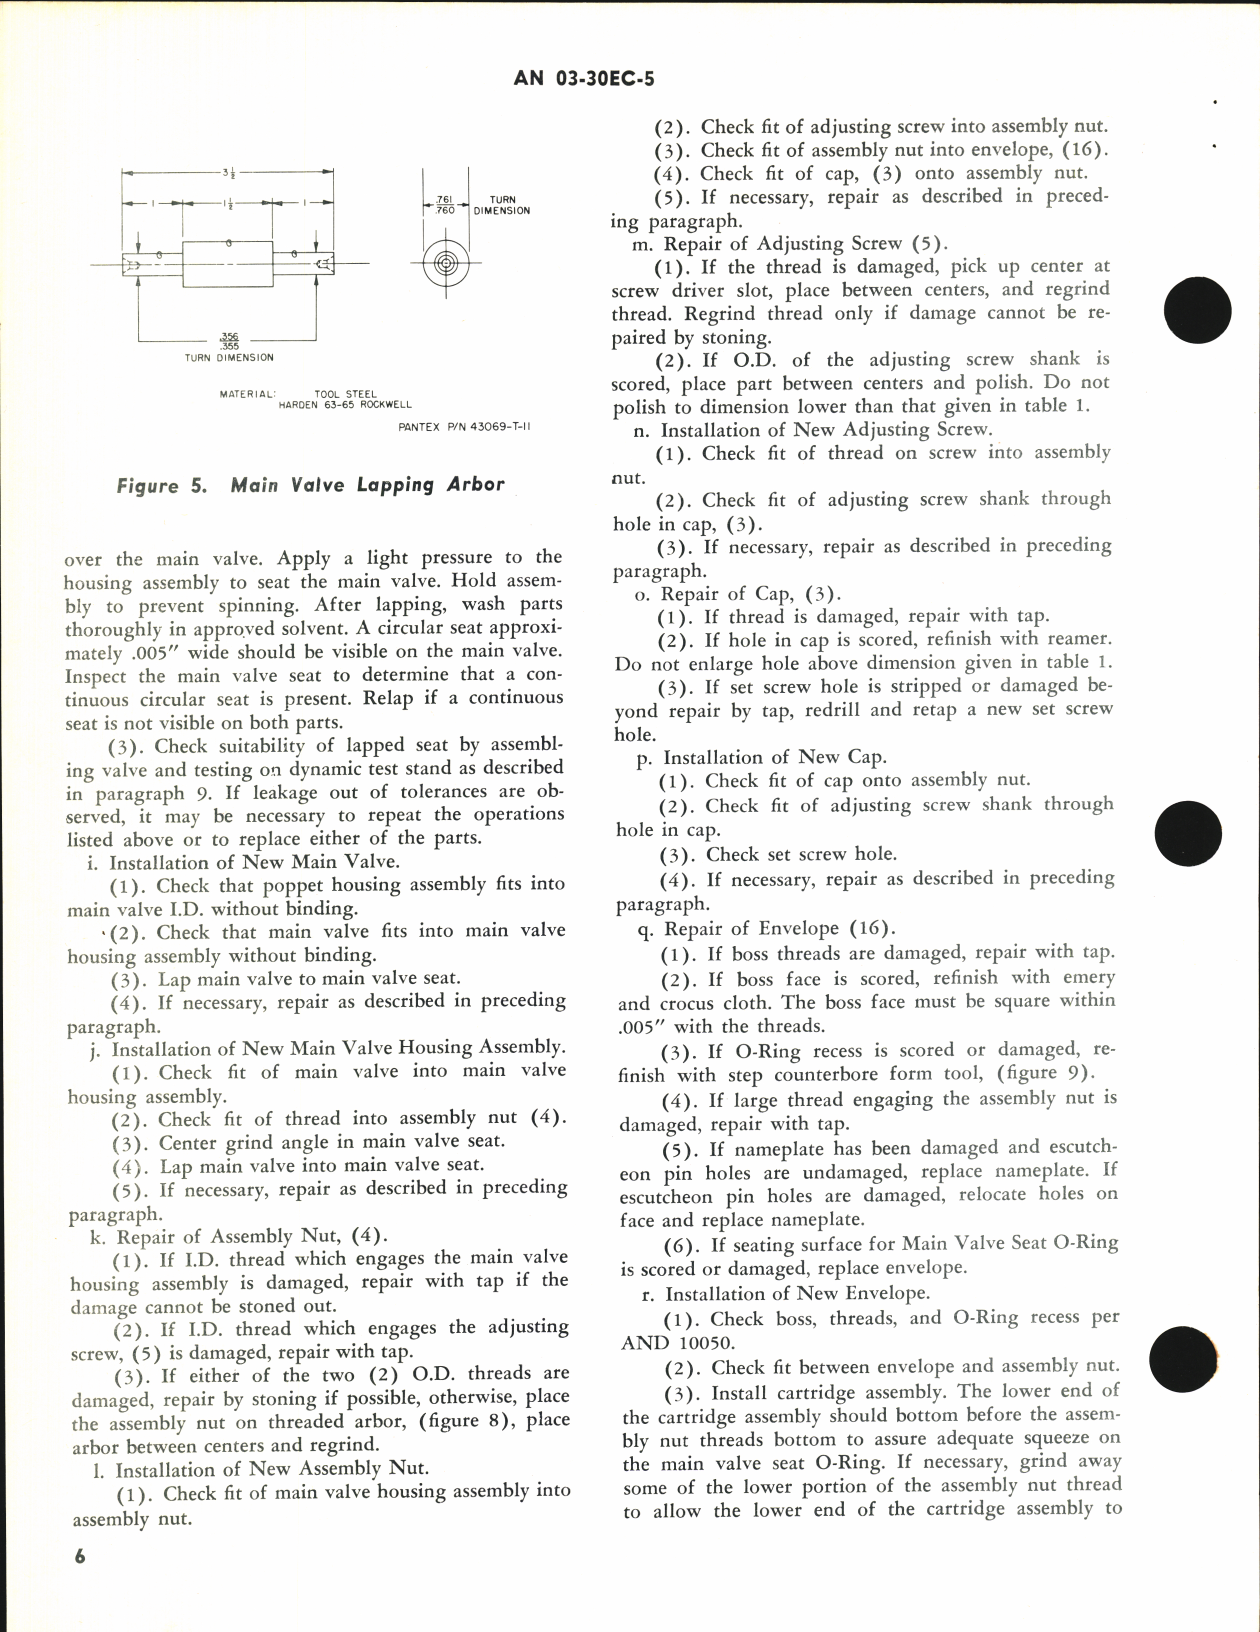 Sample page 6 from AirCorps Library document: Overhaul Instructions with Parts Breakdown for Hydraulic Relief Valve HPLV-A2